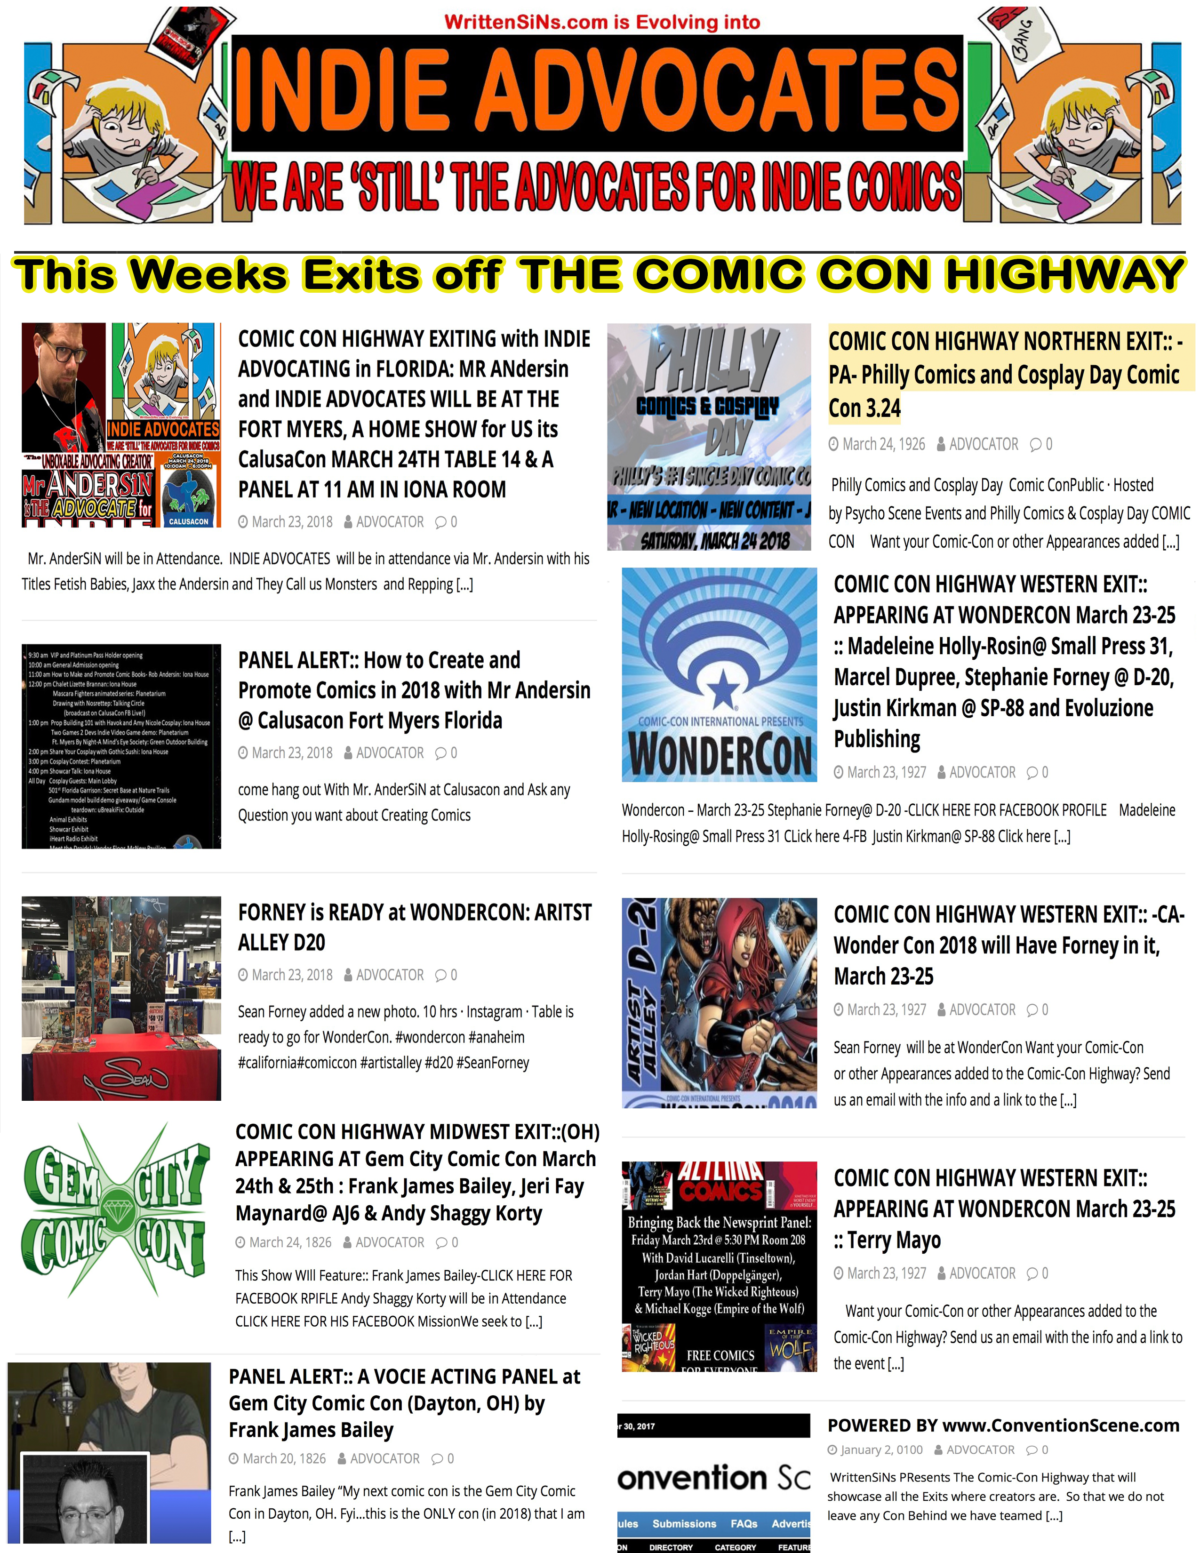 INTRODUCING THE COMIC CON HIGHWAY ROAD MAP